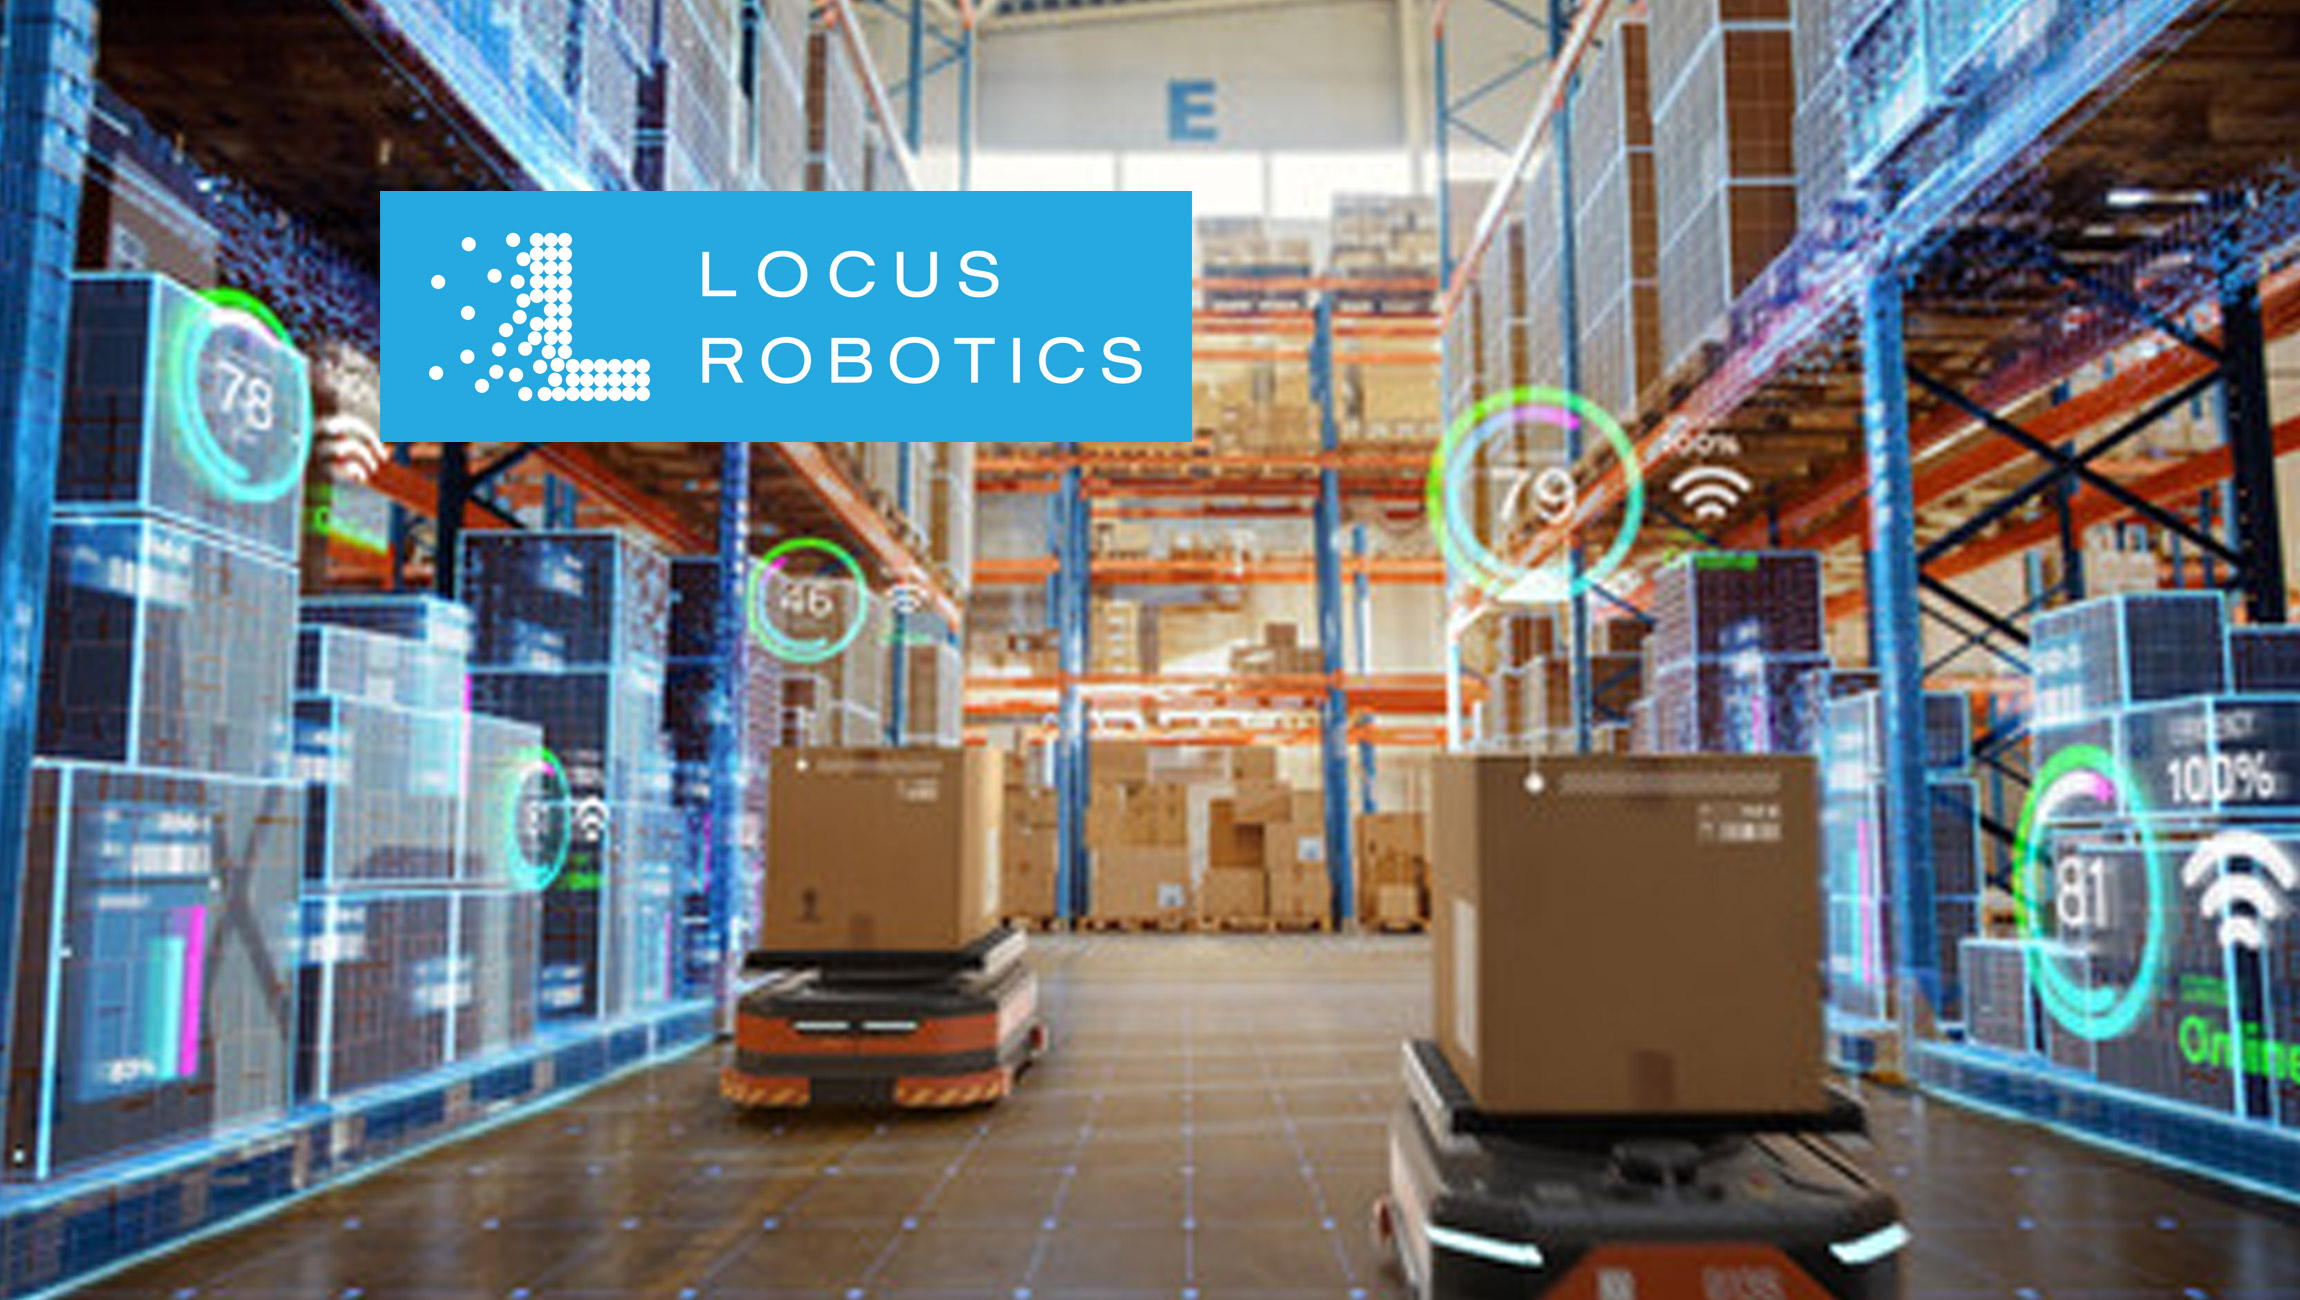 Locus Robotics Introduces Locusone, the Warehouse Orchestration Platform Powering Centrally Managed Multi-Bot AMR Automation